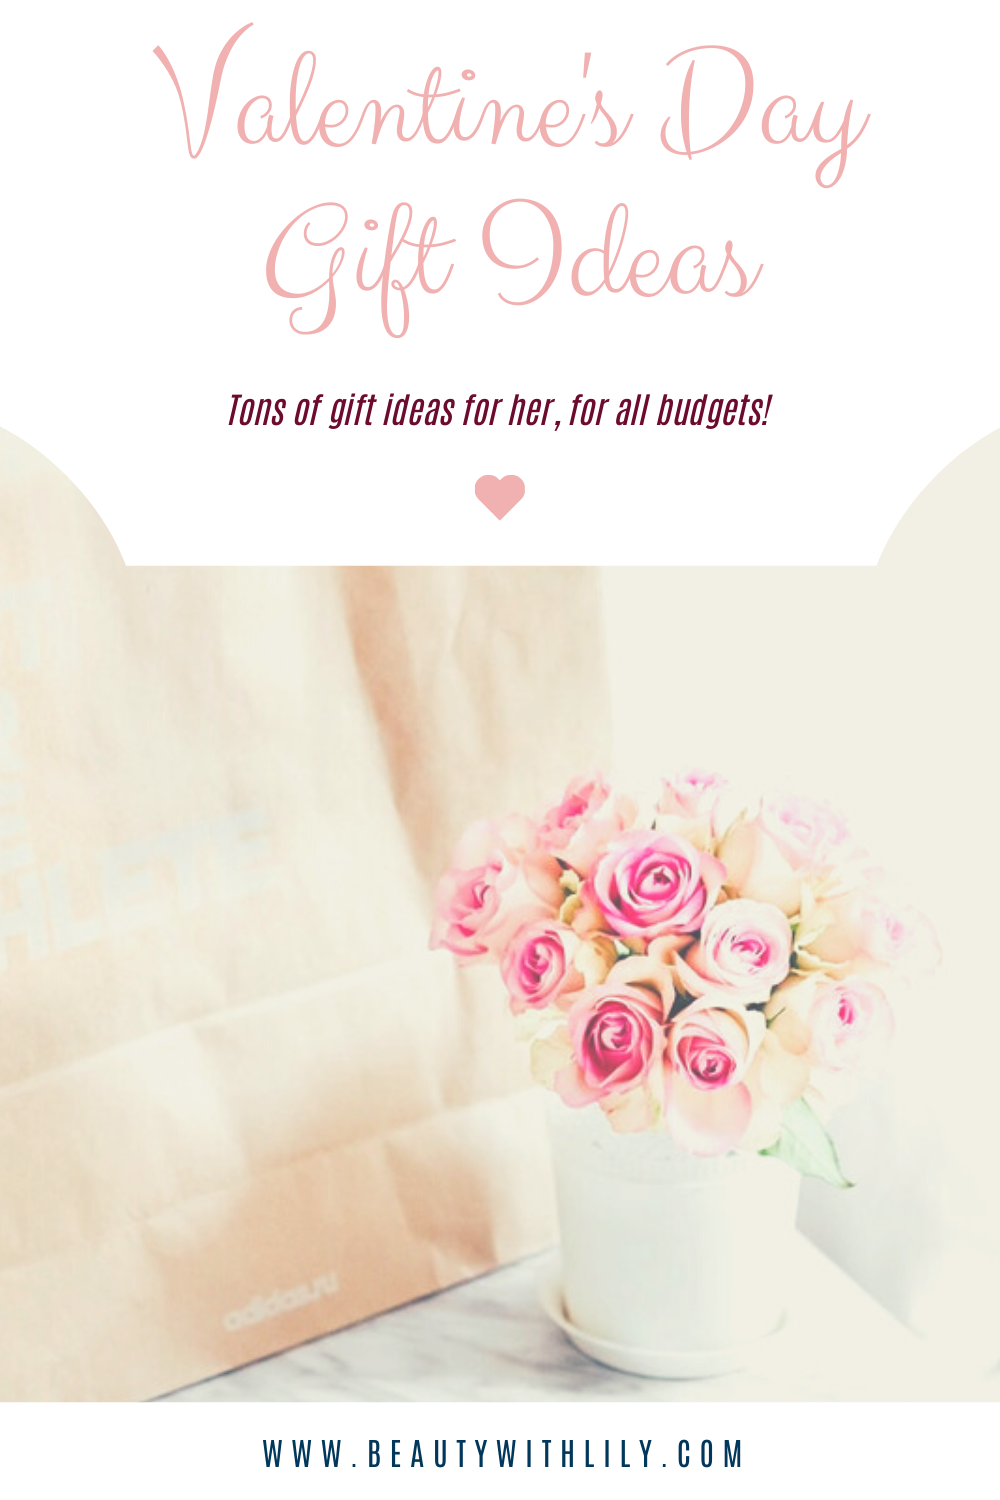 Galentine's Gift Ideas // Valentine's Day Gift Ideas For Her // Sweet Gifts for Her // Affordable Best Friend Gift Ideas // Gifts for Friends | Beauty With Lily #giftsforher #valentinesday #giftideas 